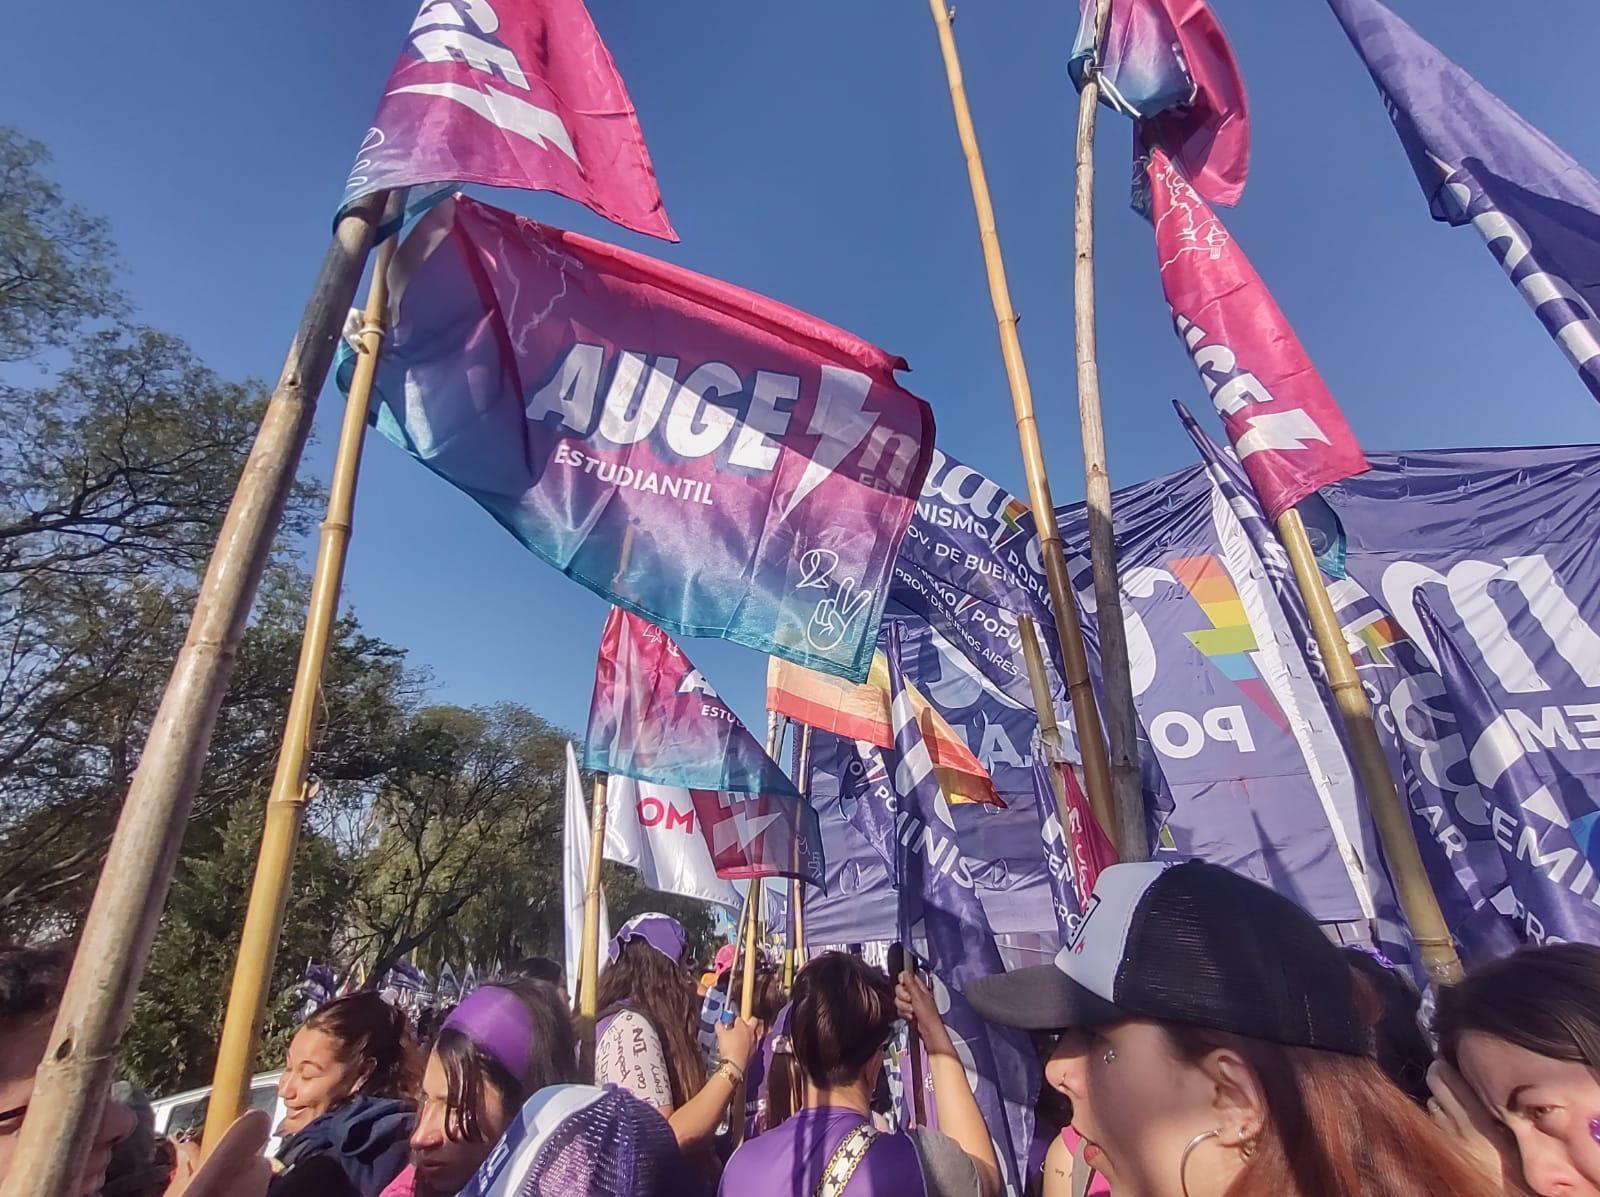 A row of people wearing mostly purple caps holds several bamboo sticks with AUGE’s flag in a pink, blue, and purple gradient, the LGBTQIA+ flag, and the Marea Popular purple banner.